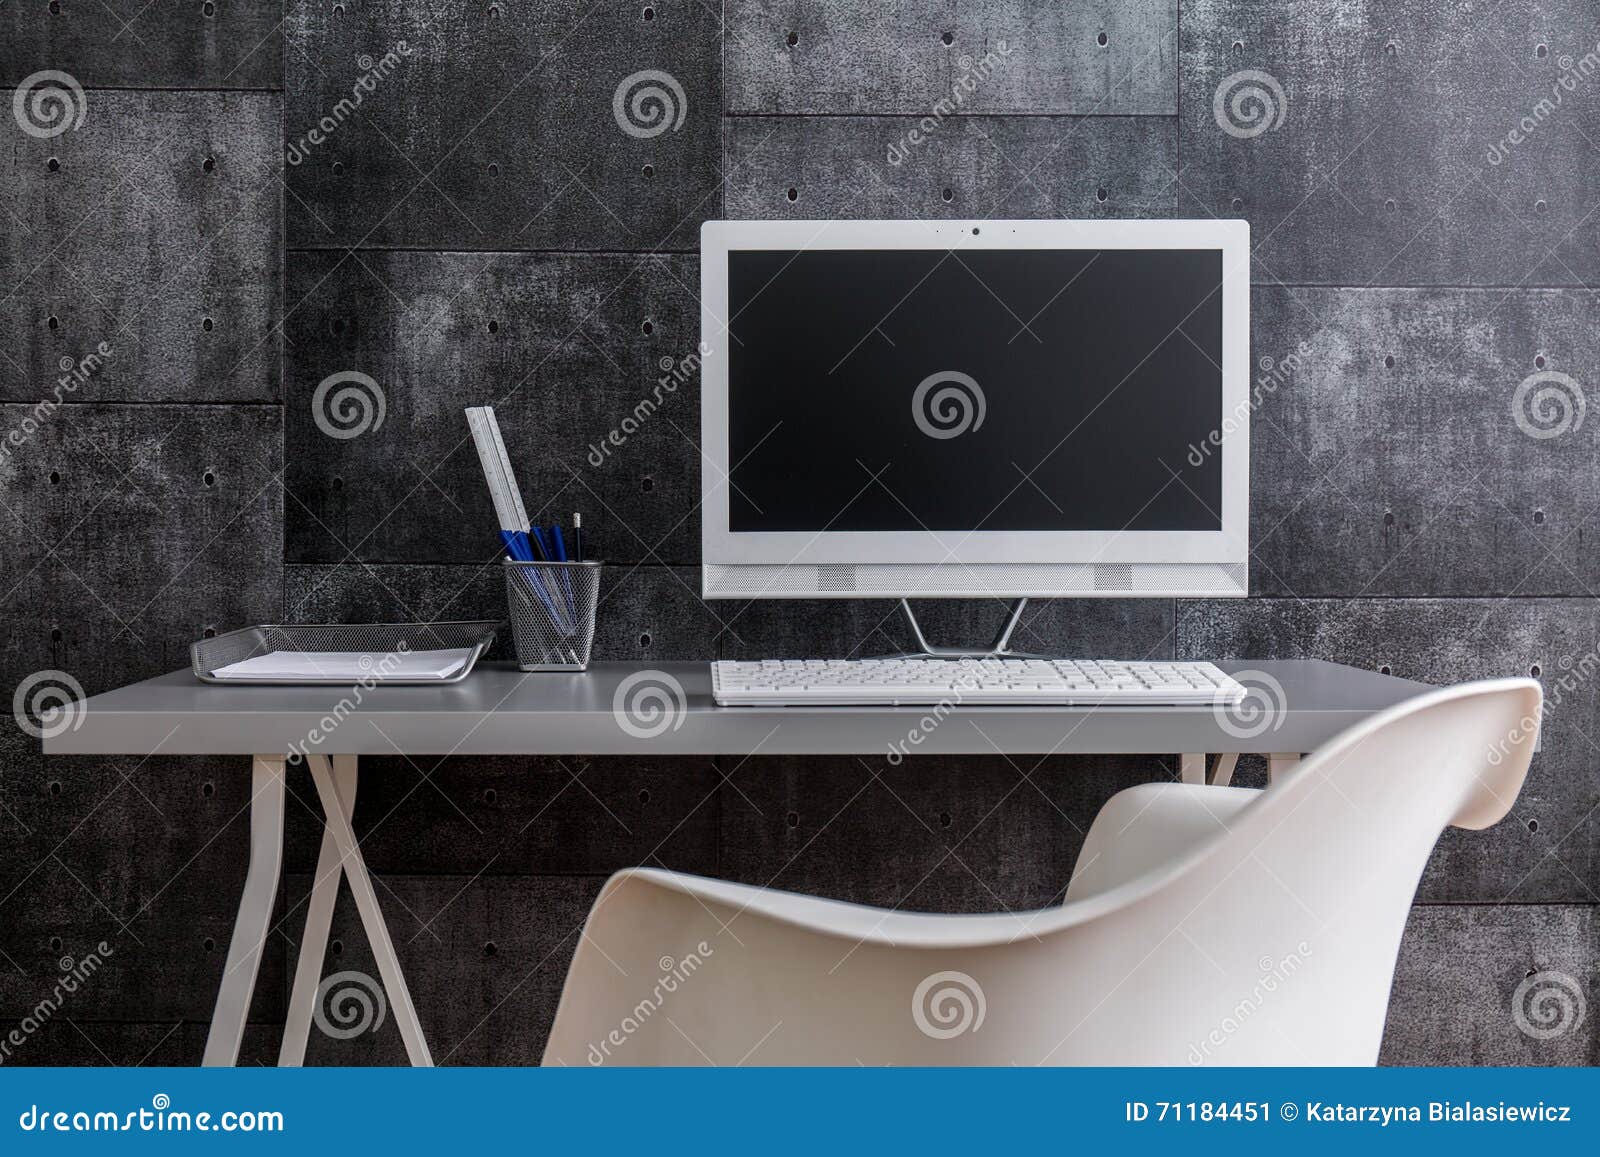 Post Industrial Style Of Modern Workspace Stock Image Image Of